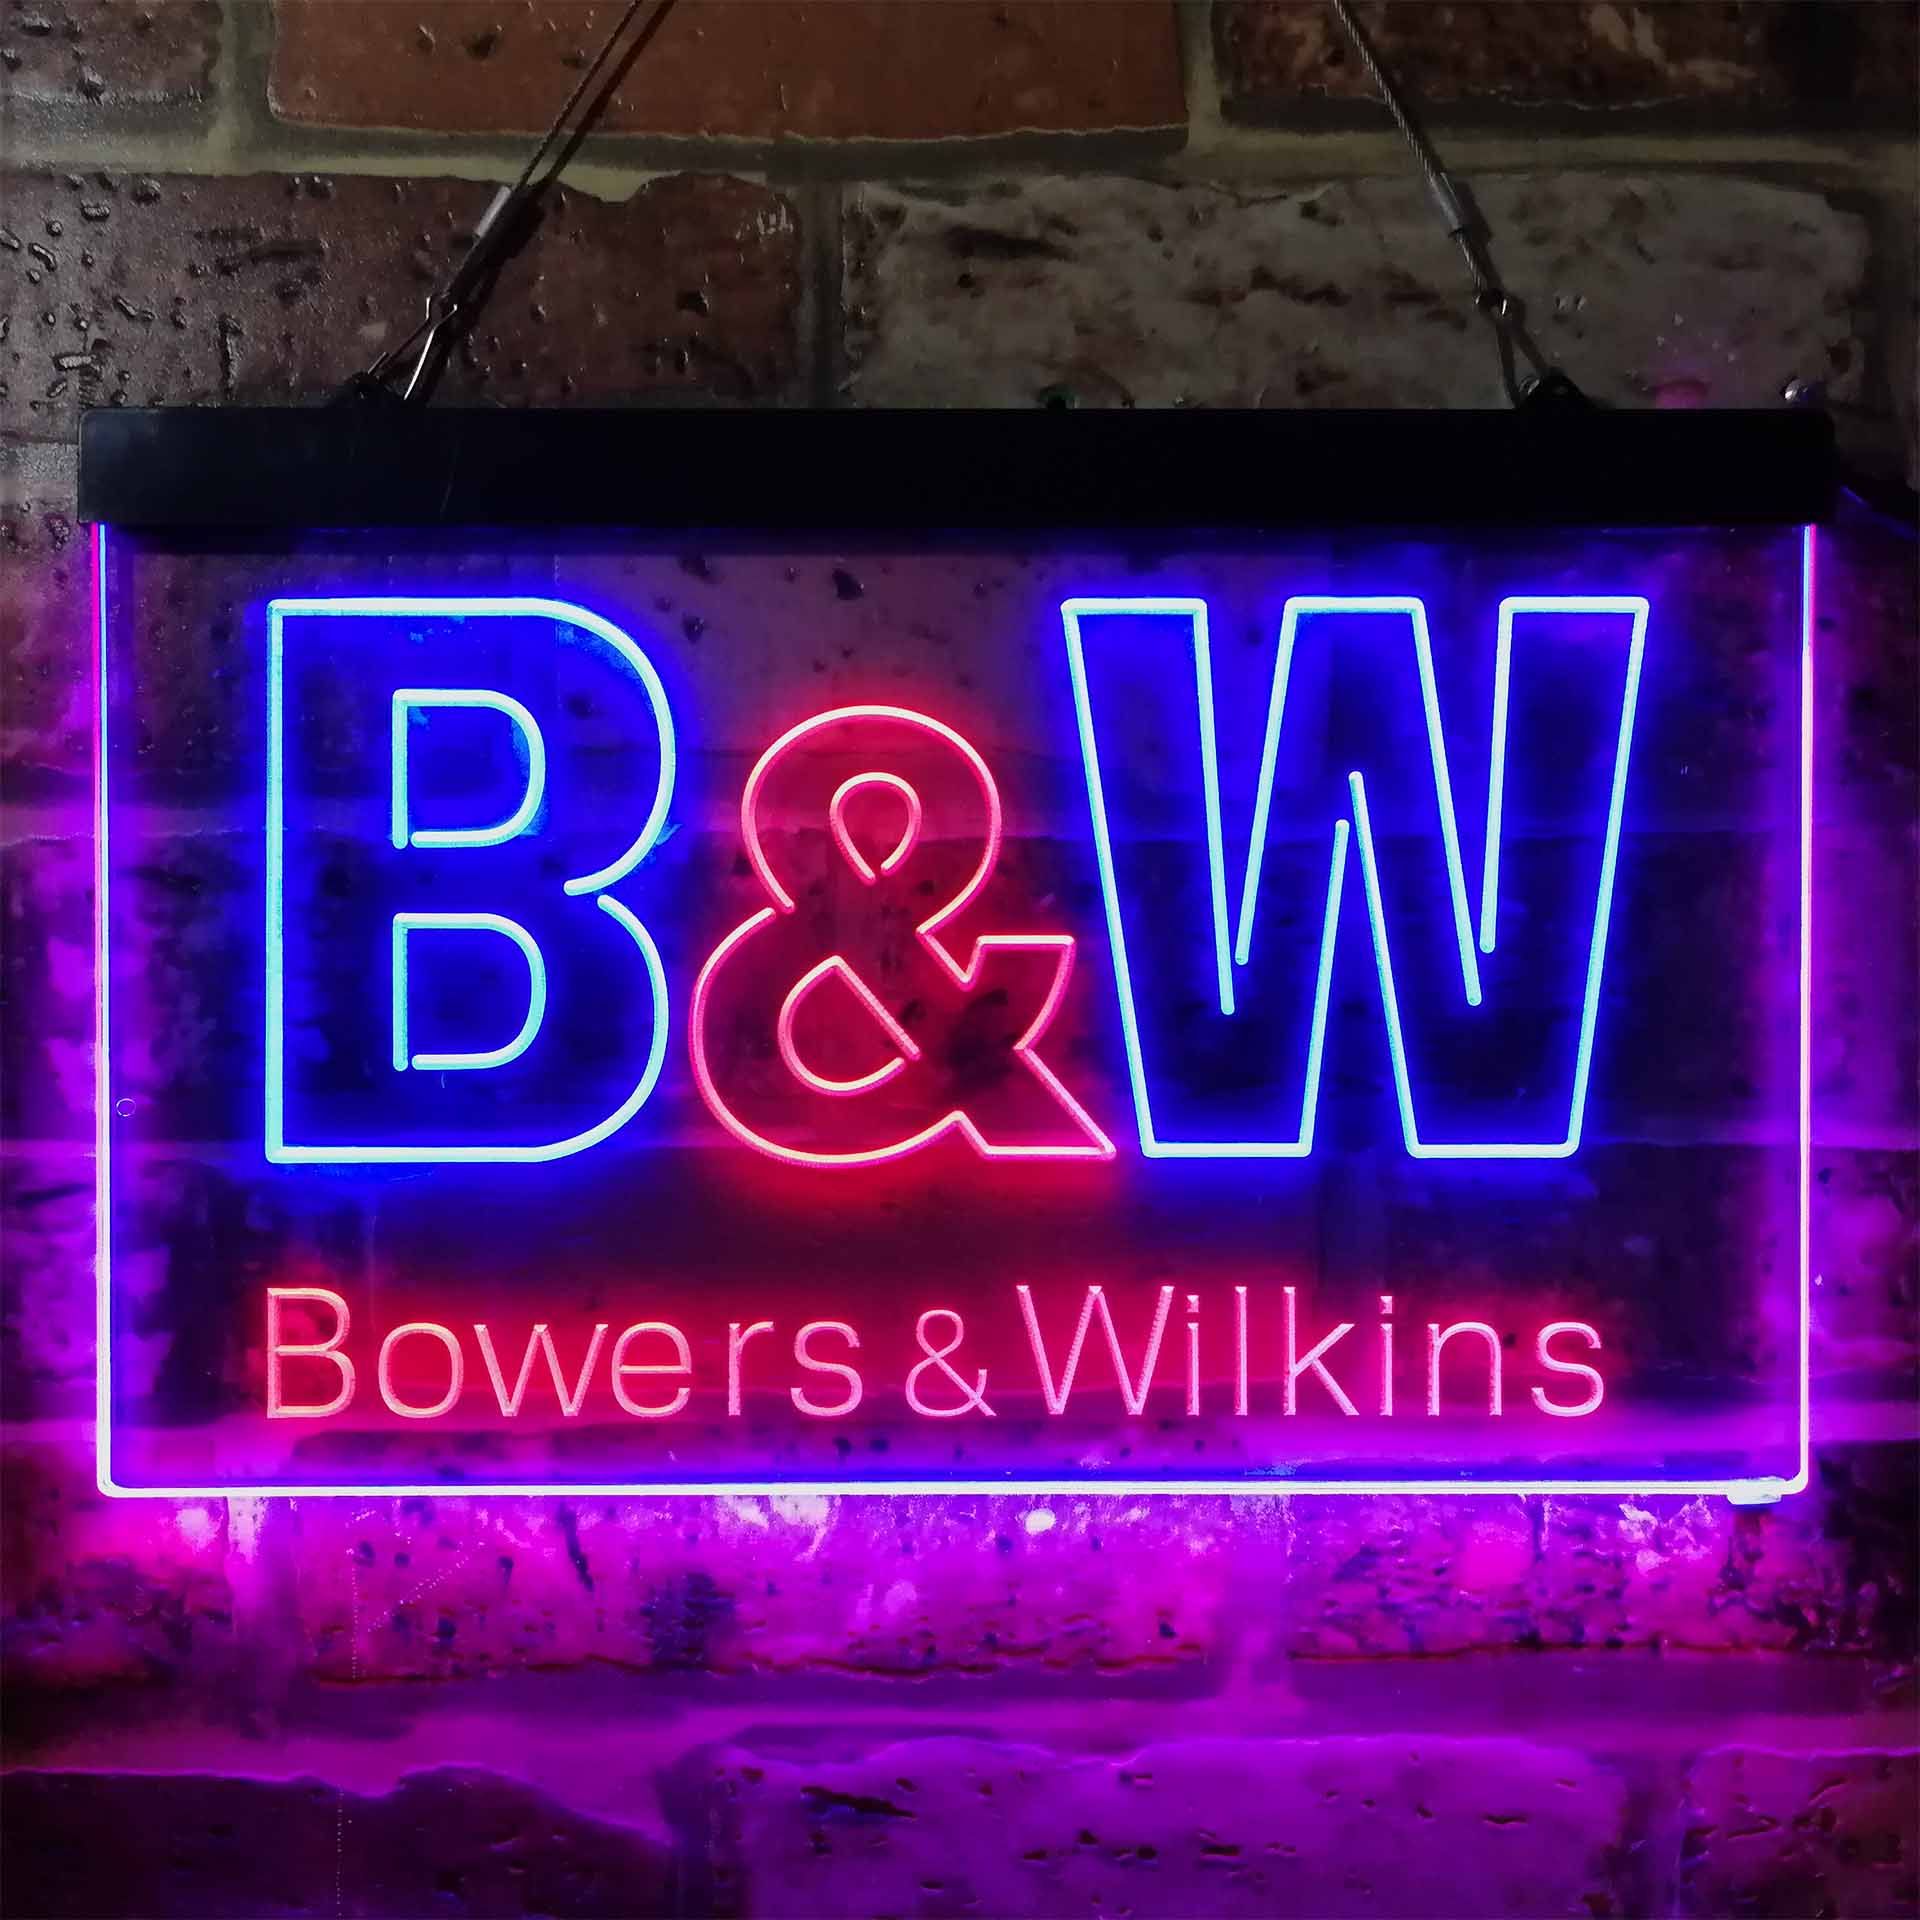 Bowers & Wilkins Dual LED Neon Light Sign